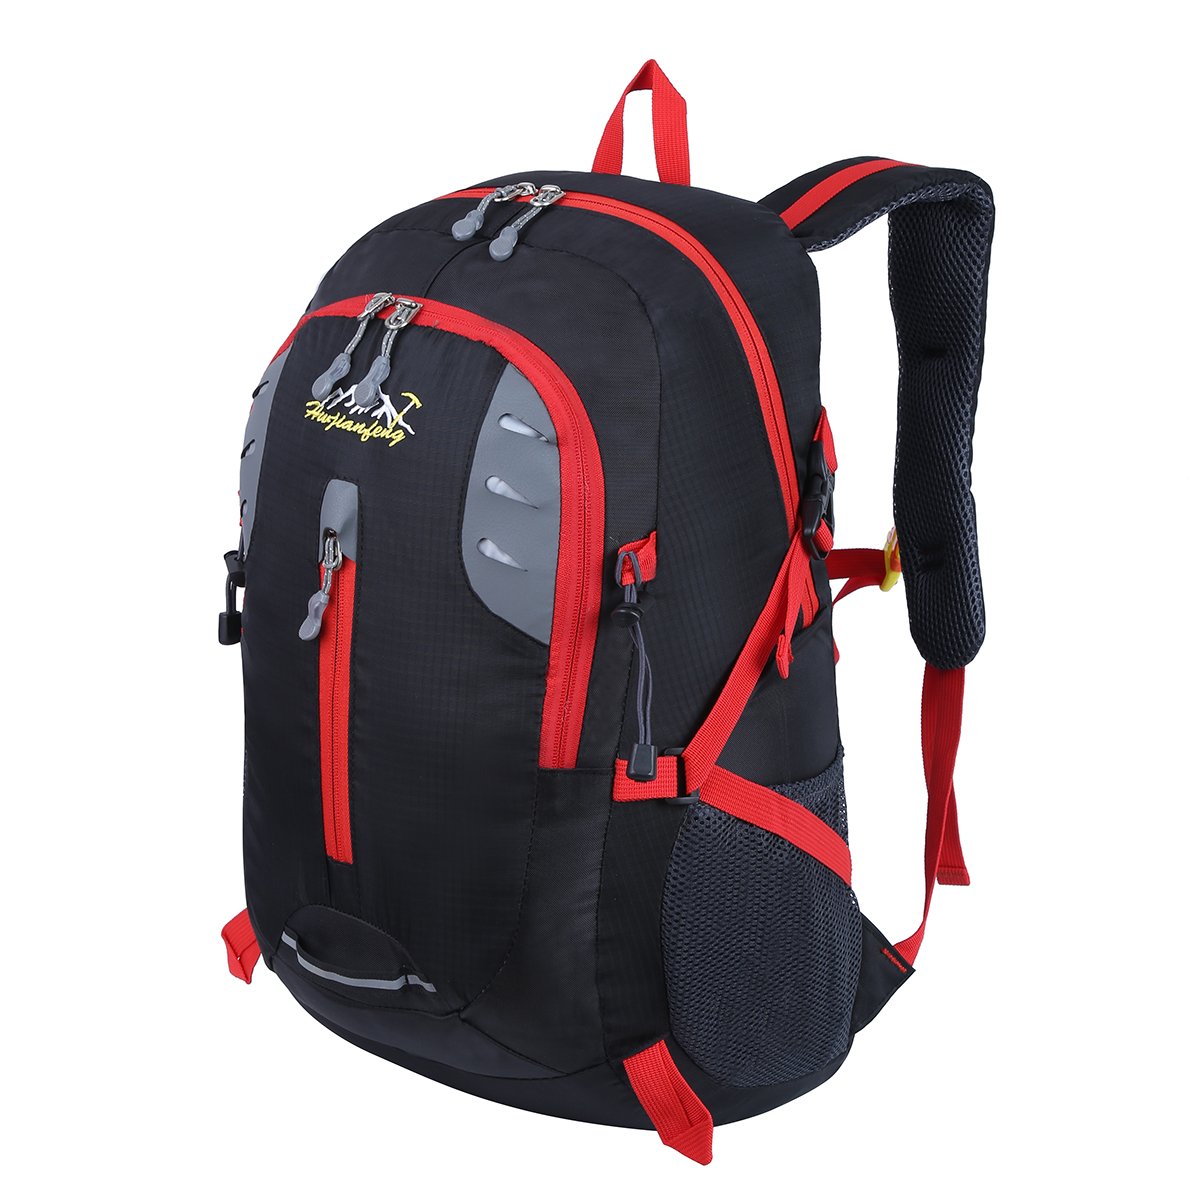 HWJIANFENG Backpack Outdoor Sports Daypack for Hiking Cycling ...